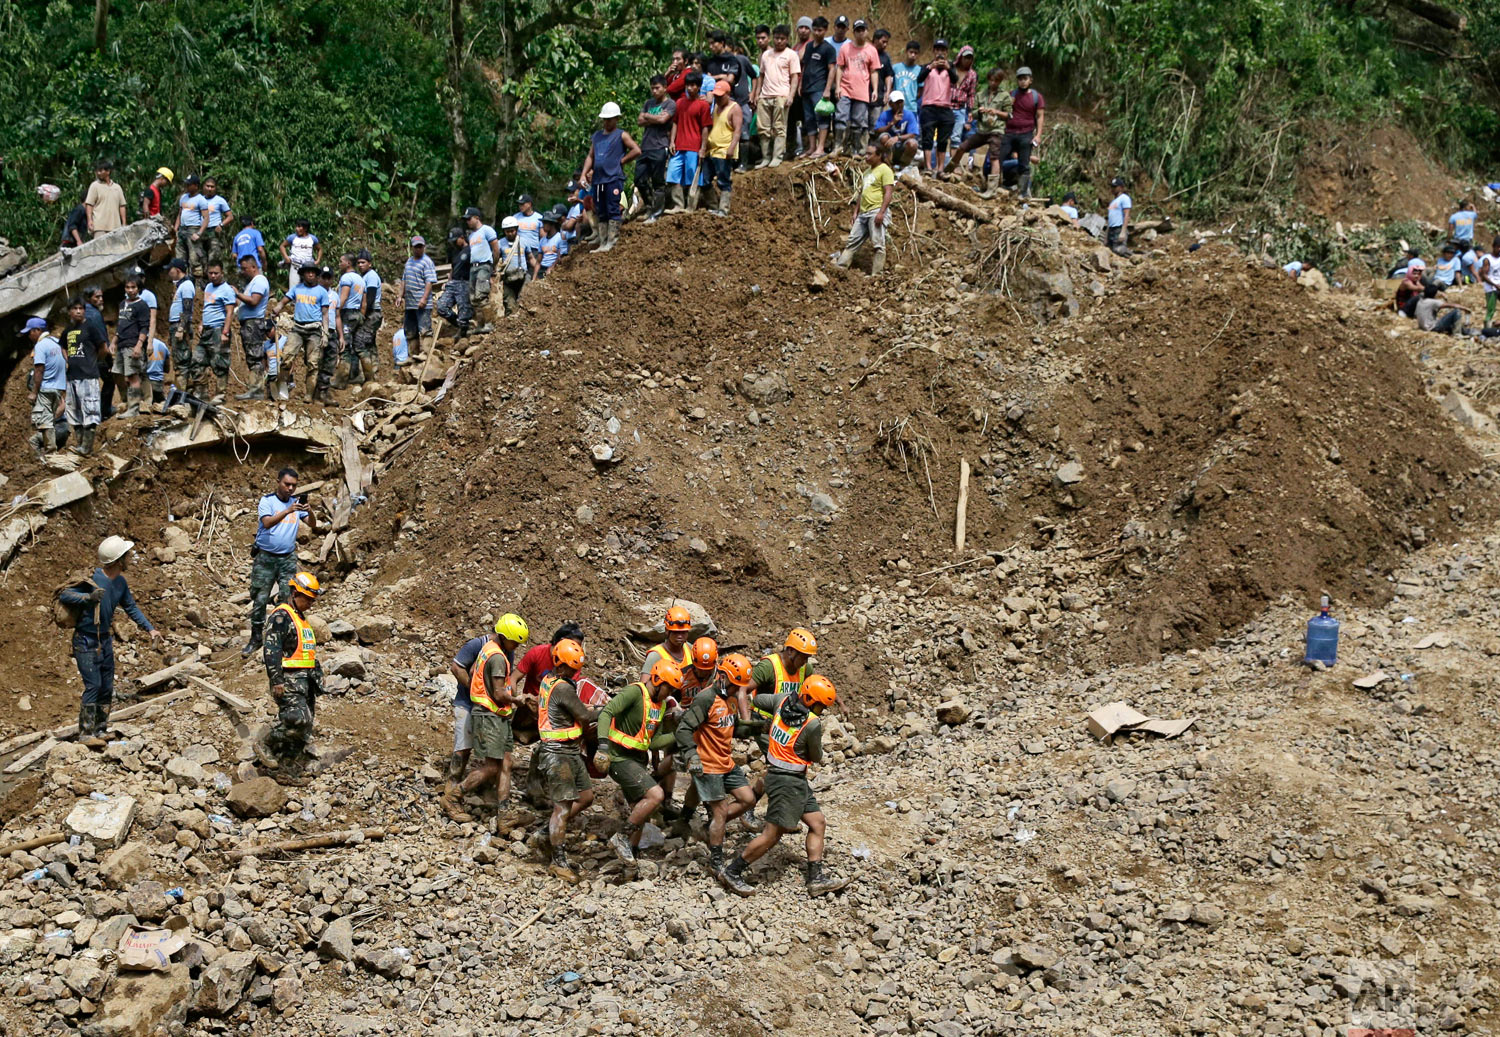  Rescuers carry a body they recovered at the site where victims are believed to have been buried by a landslide after Typhoon Mangkhut lashed Itogon, Benguet province, northern Philippines on Monday, Sept. 17, 2018. Itogon Mayor Victorio Palangdan sa